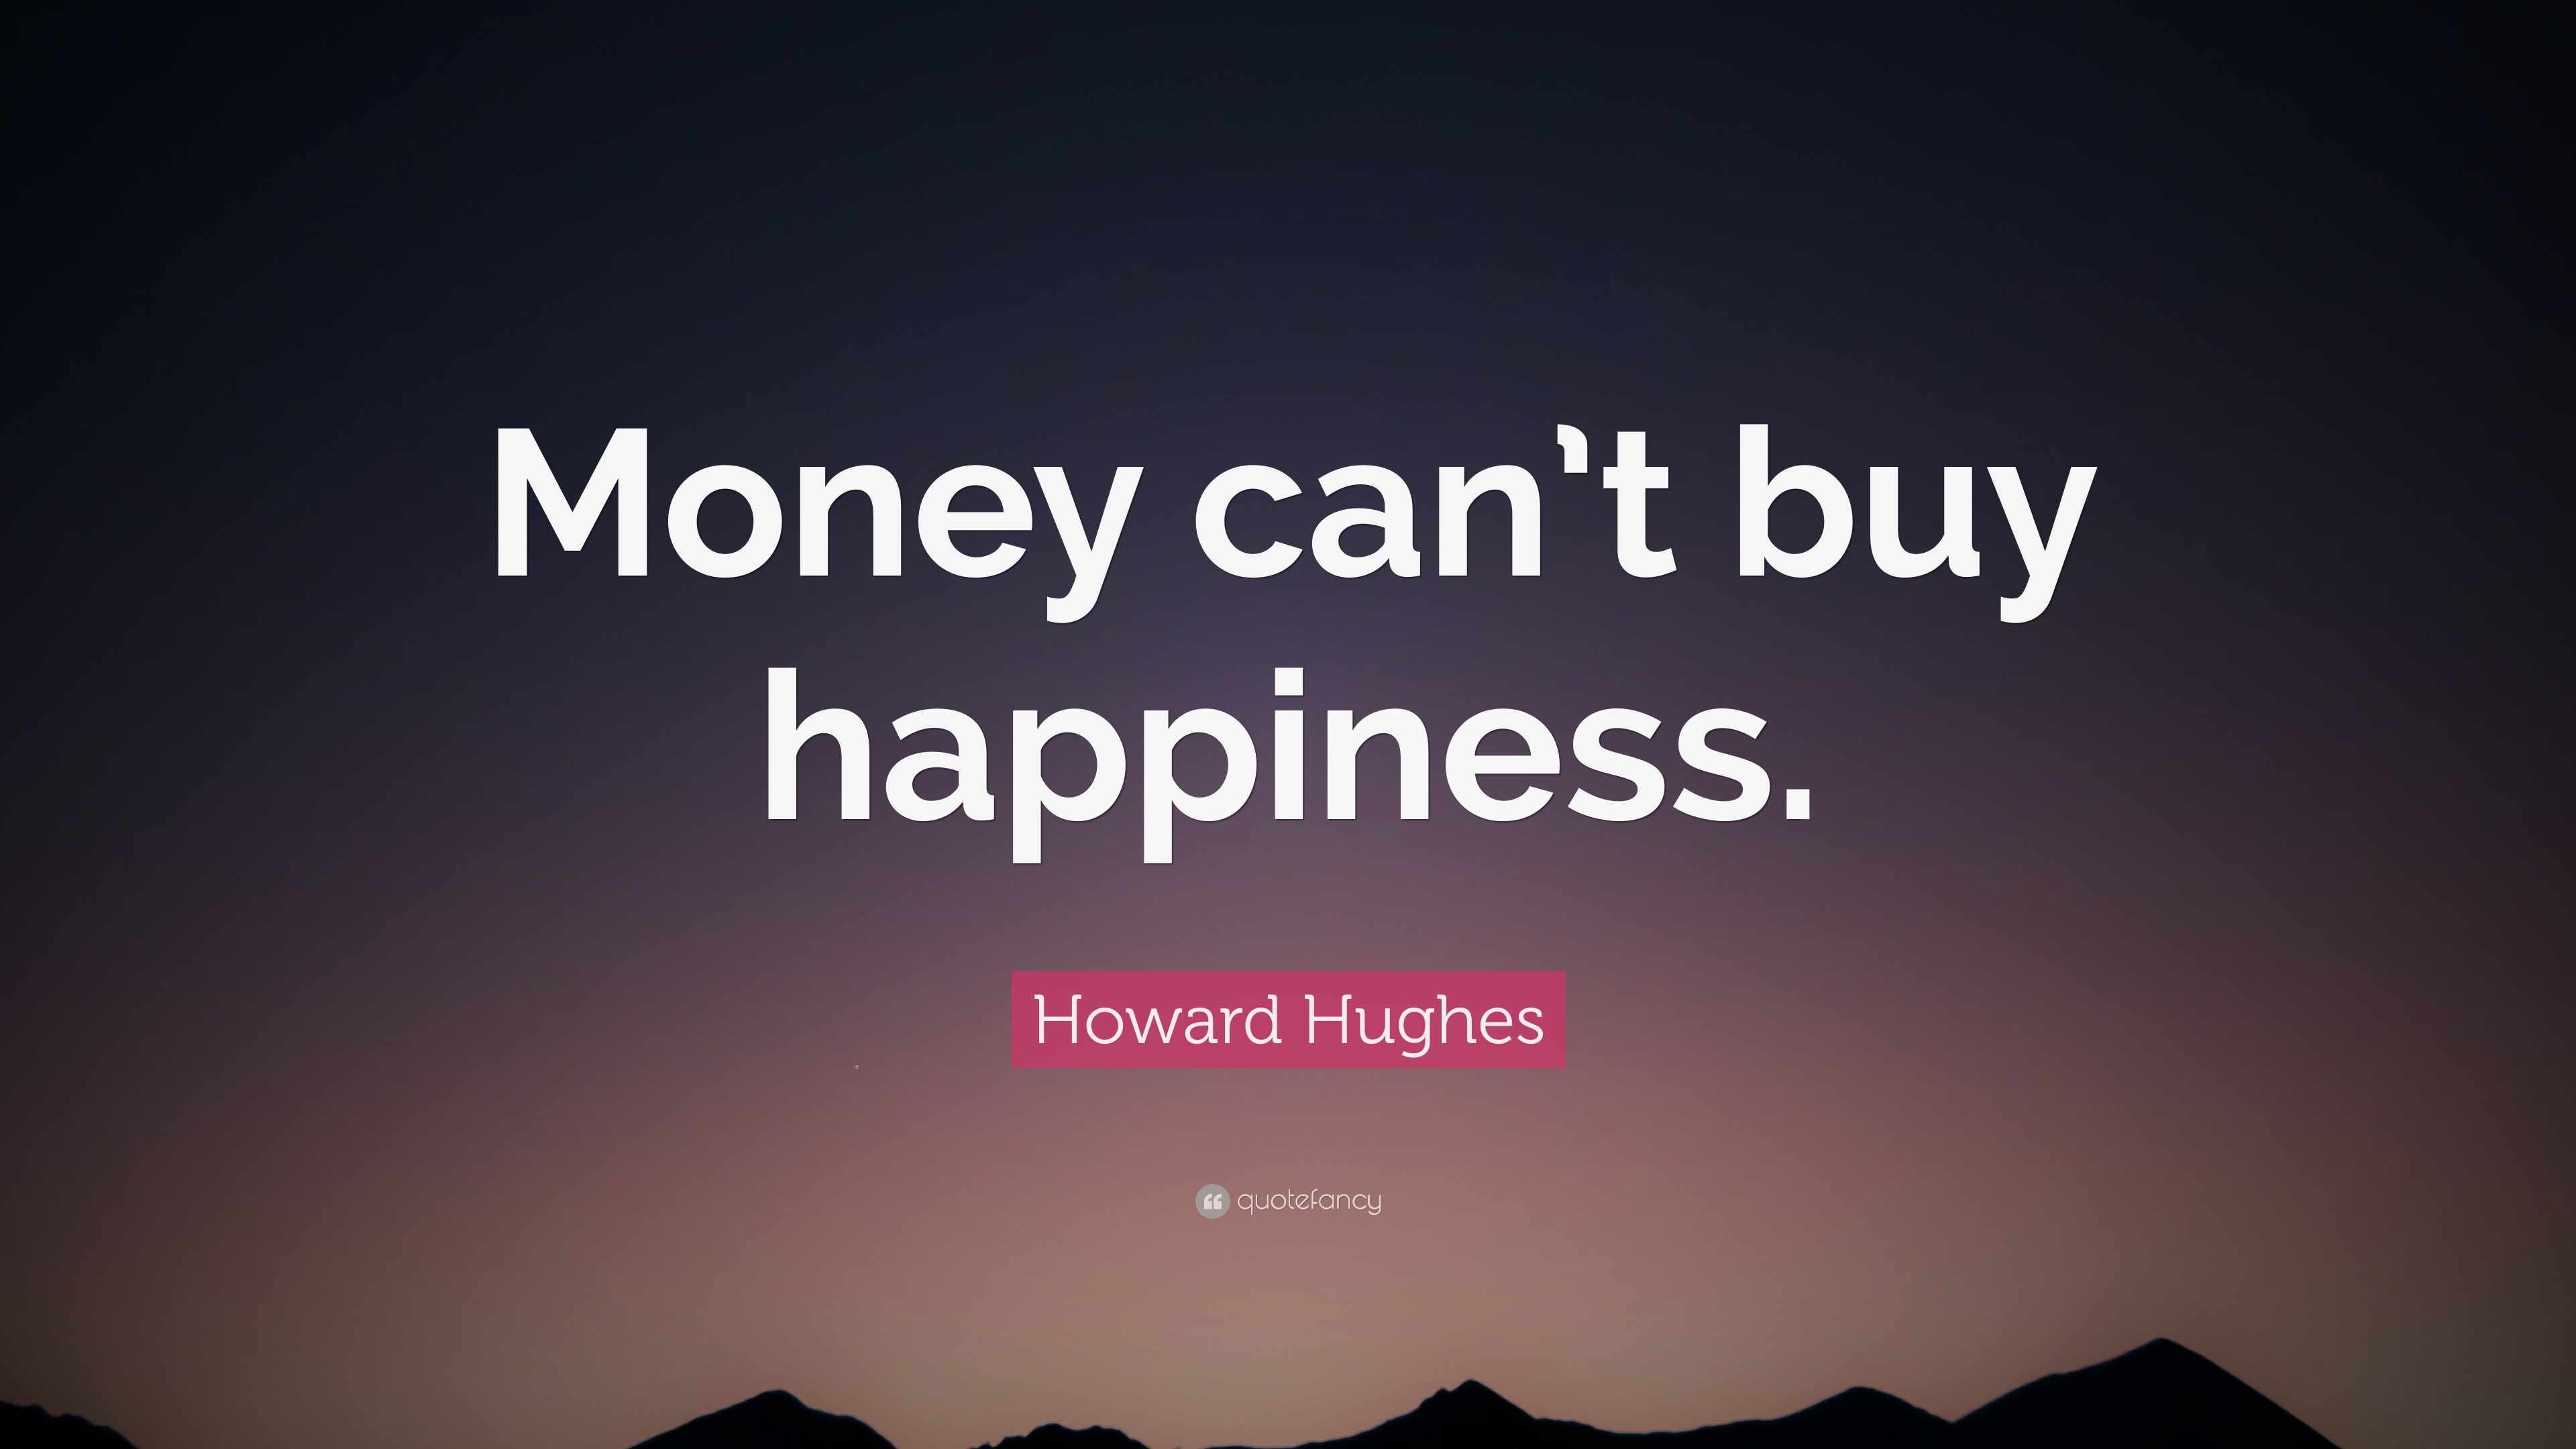 Essay money can't buy happiness